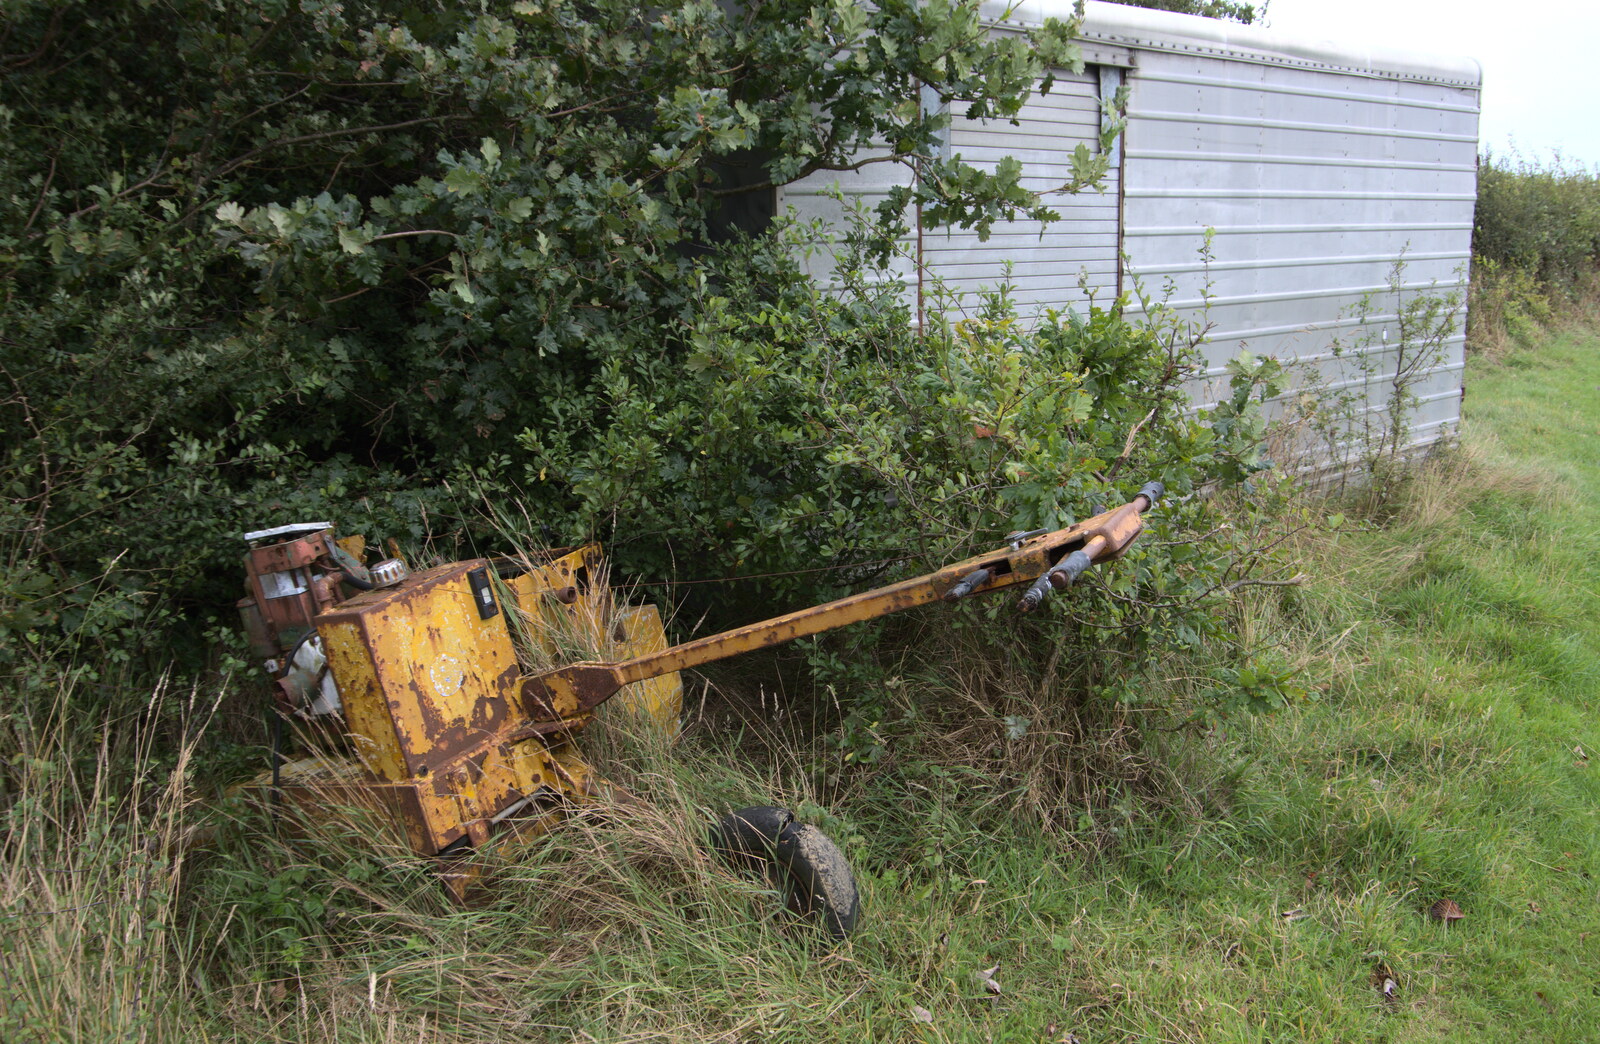 A wrecked lining machine from A Game of Cricket, and a Walk Around Chagford, Devon - 23rd August 2020